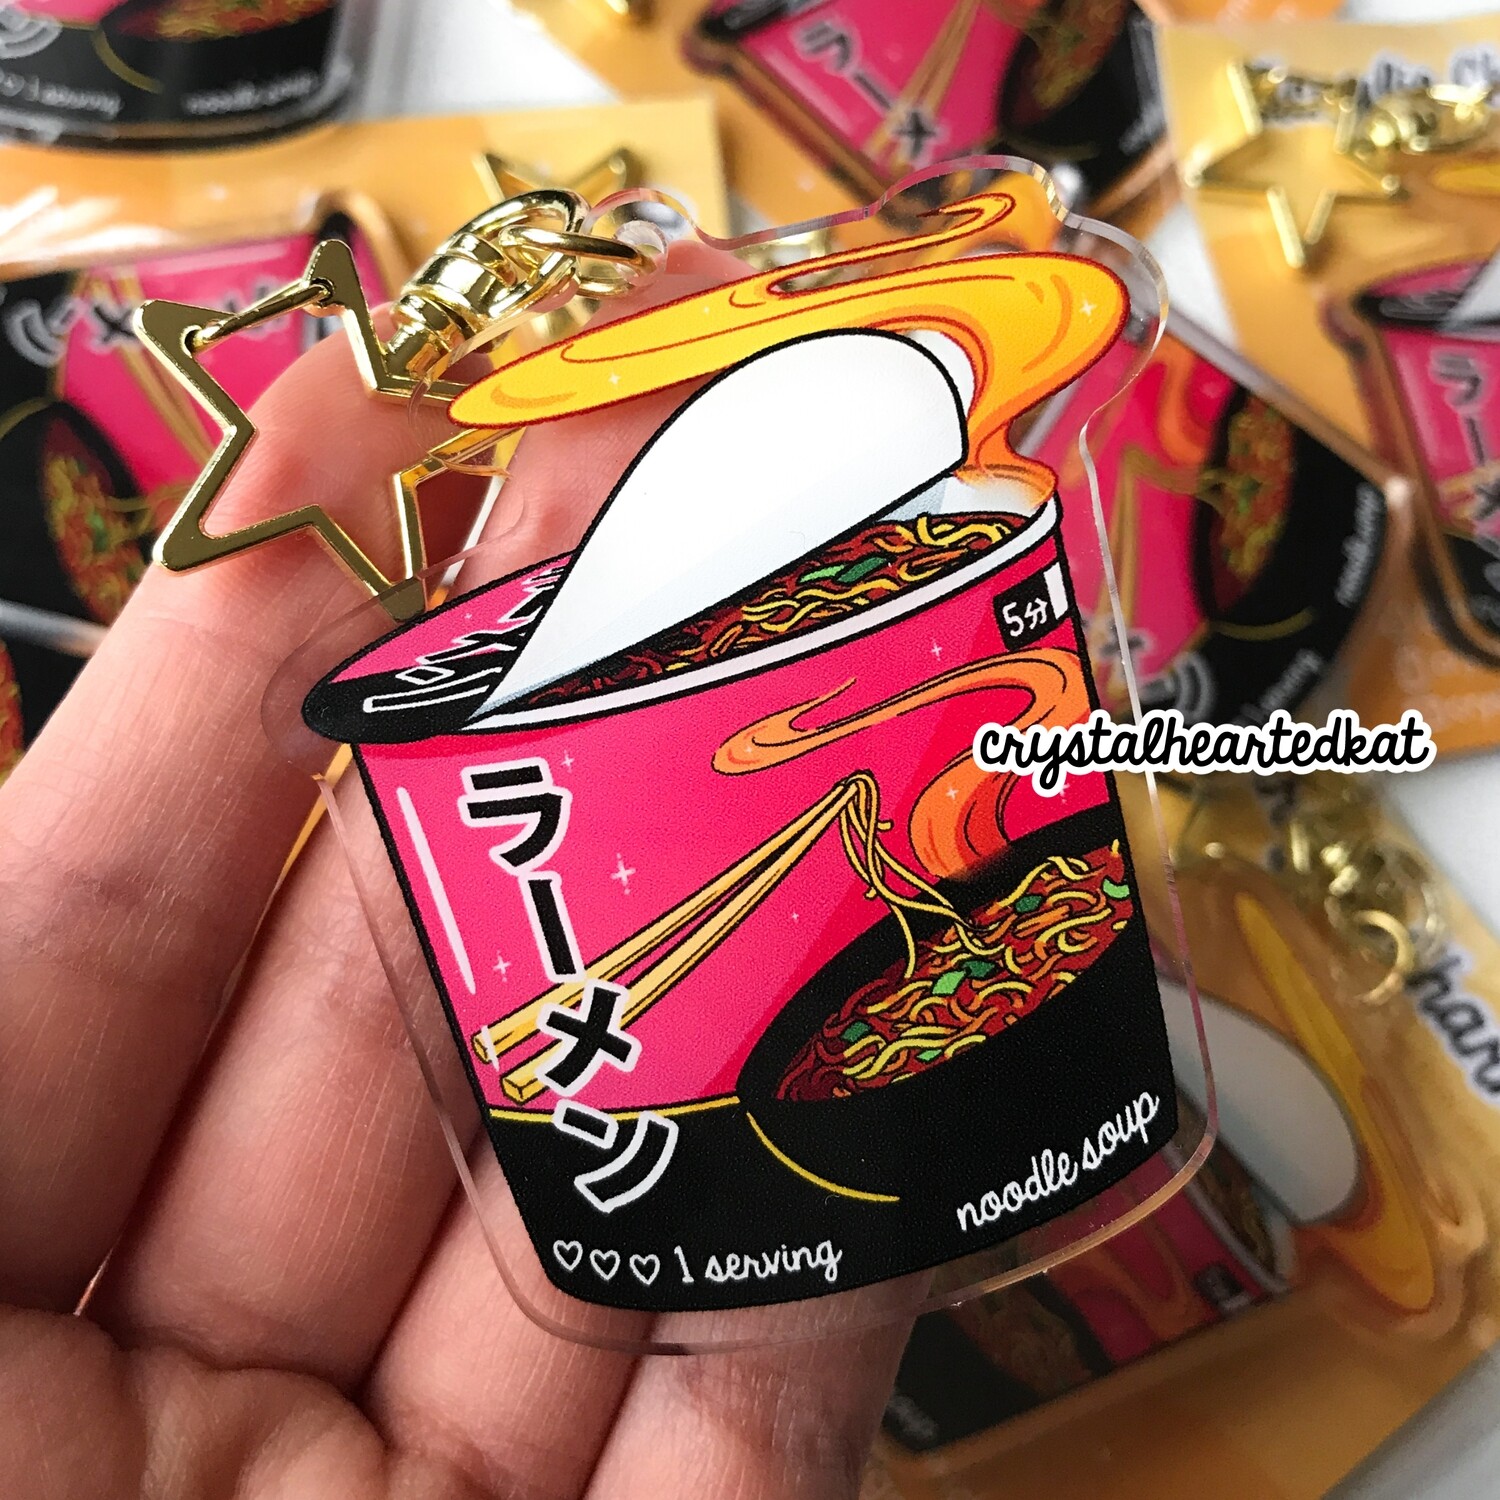 Cup Ramen Keychain Charm *Non-holographic*